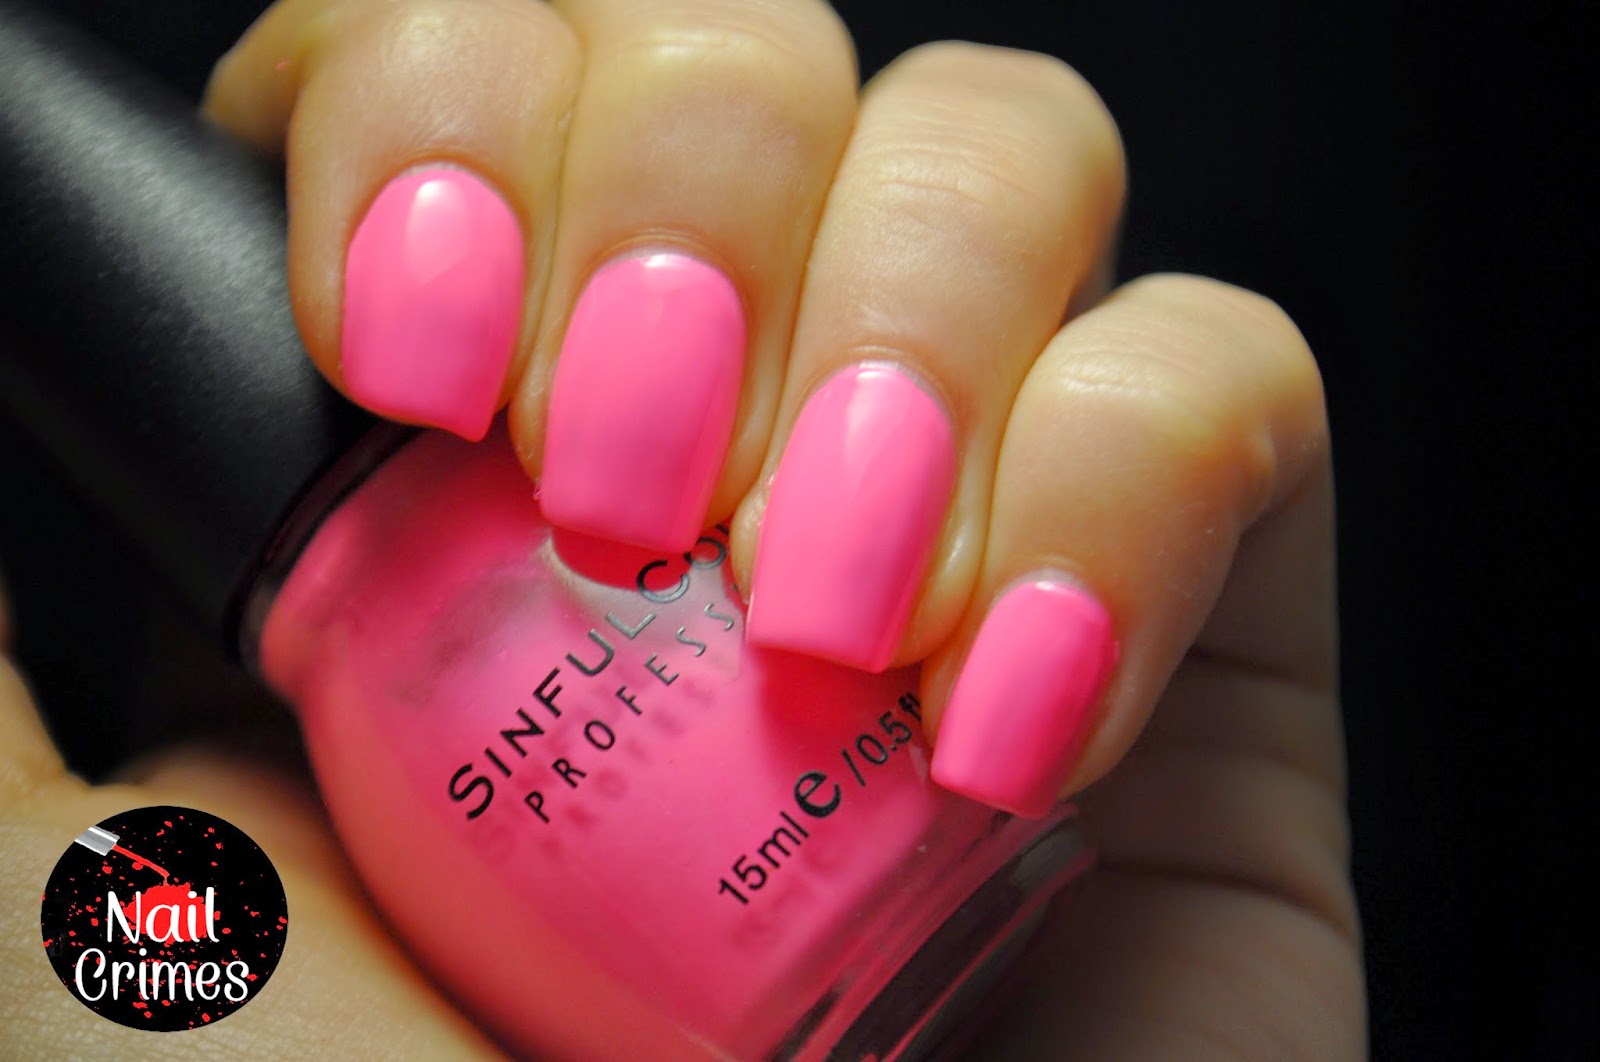 7. Sinful Colors Acid Test Nail Polish in "Fuchsia Fever" - wide 2